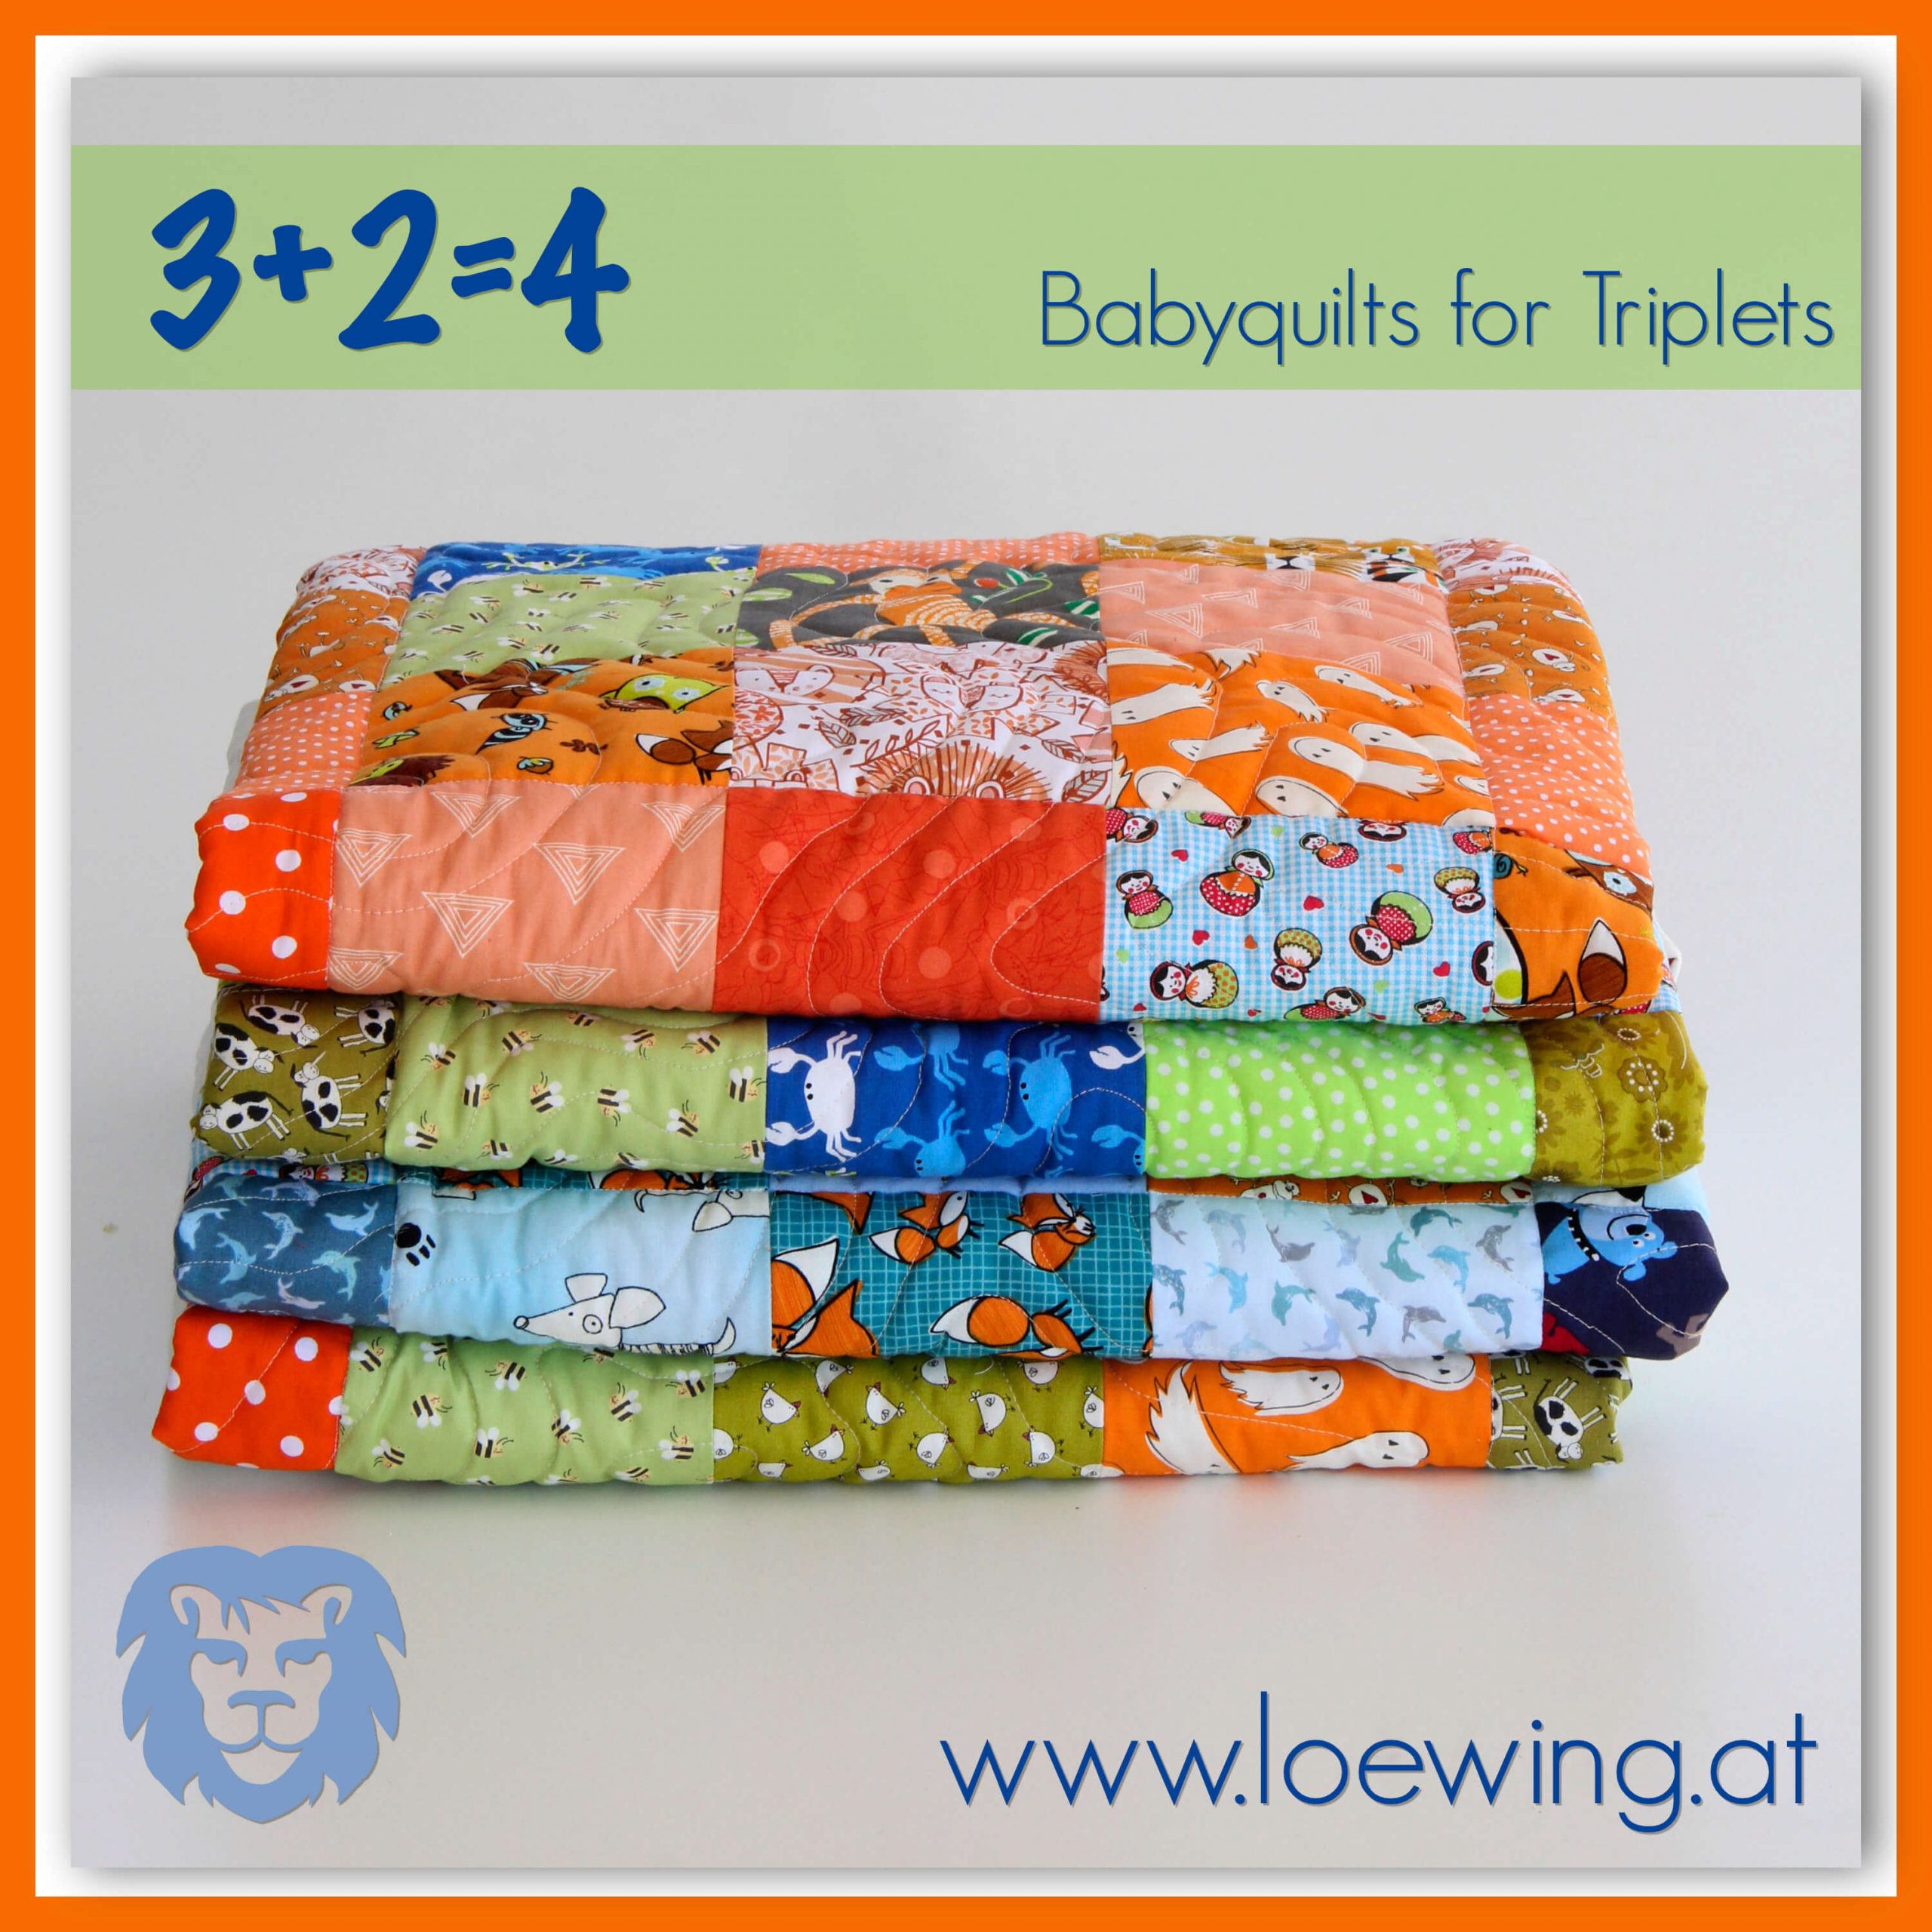 3+2=4 Baby Quilts